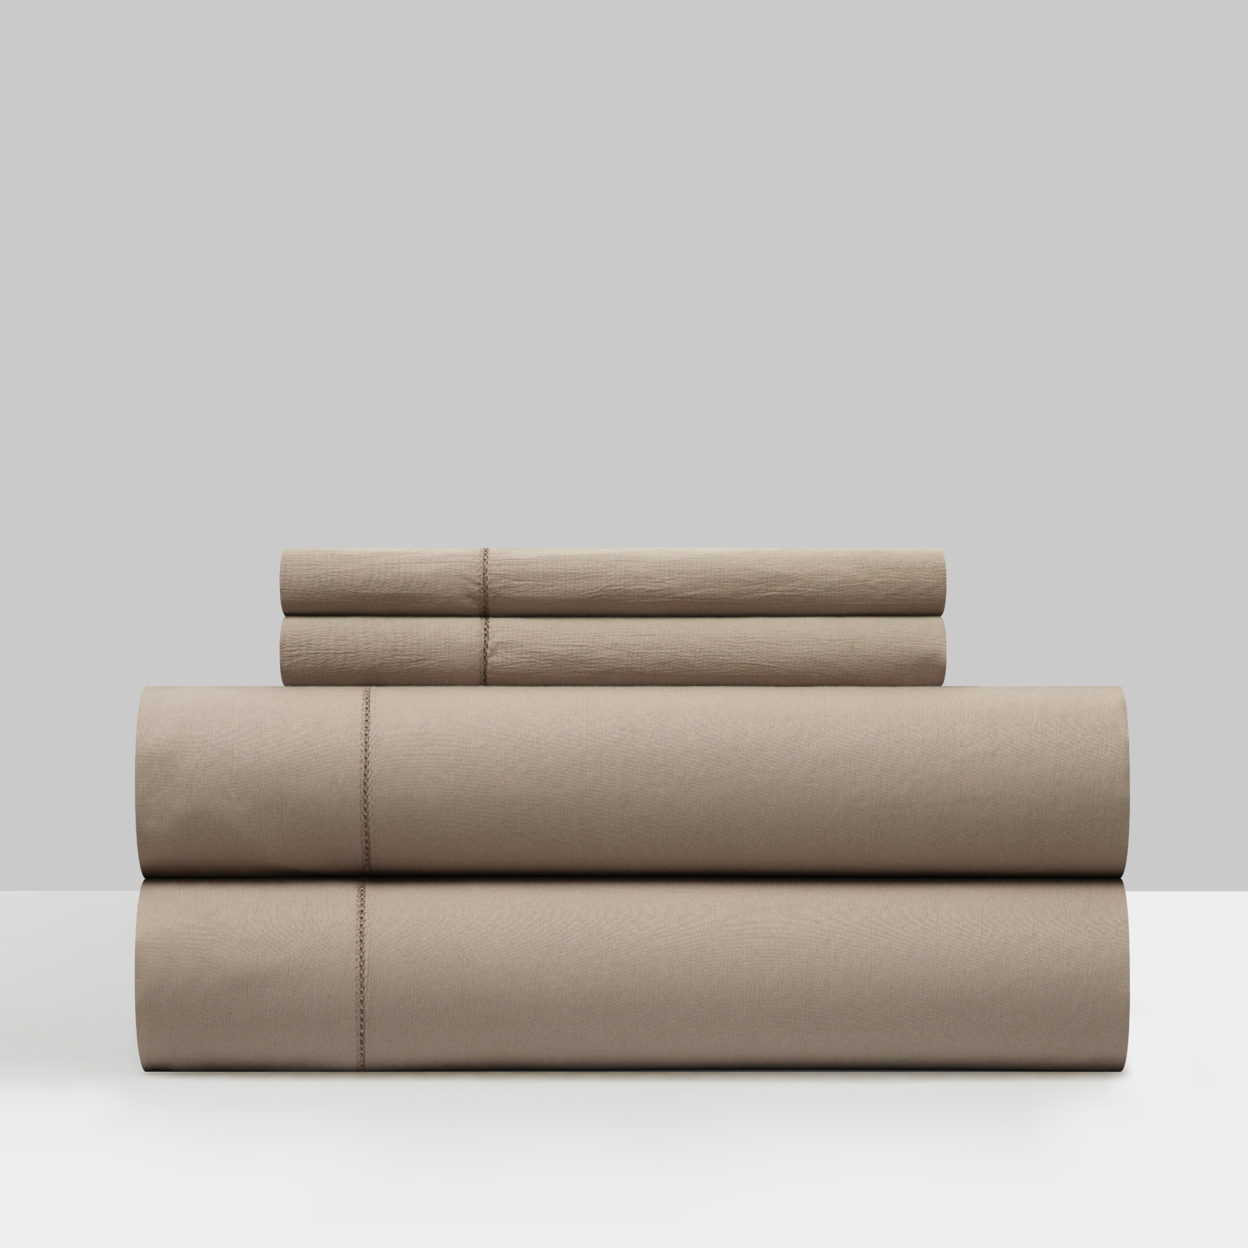 Daisy 3 Or 4 Piece Sheet Set Solid Color Washed Garment Technique - Taupe, Queen